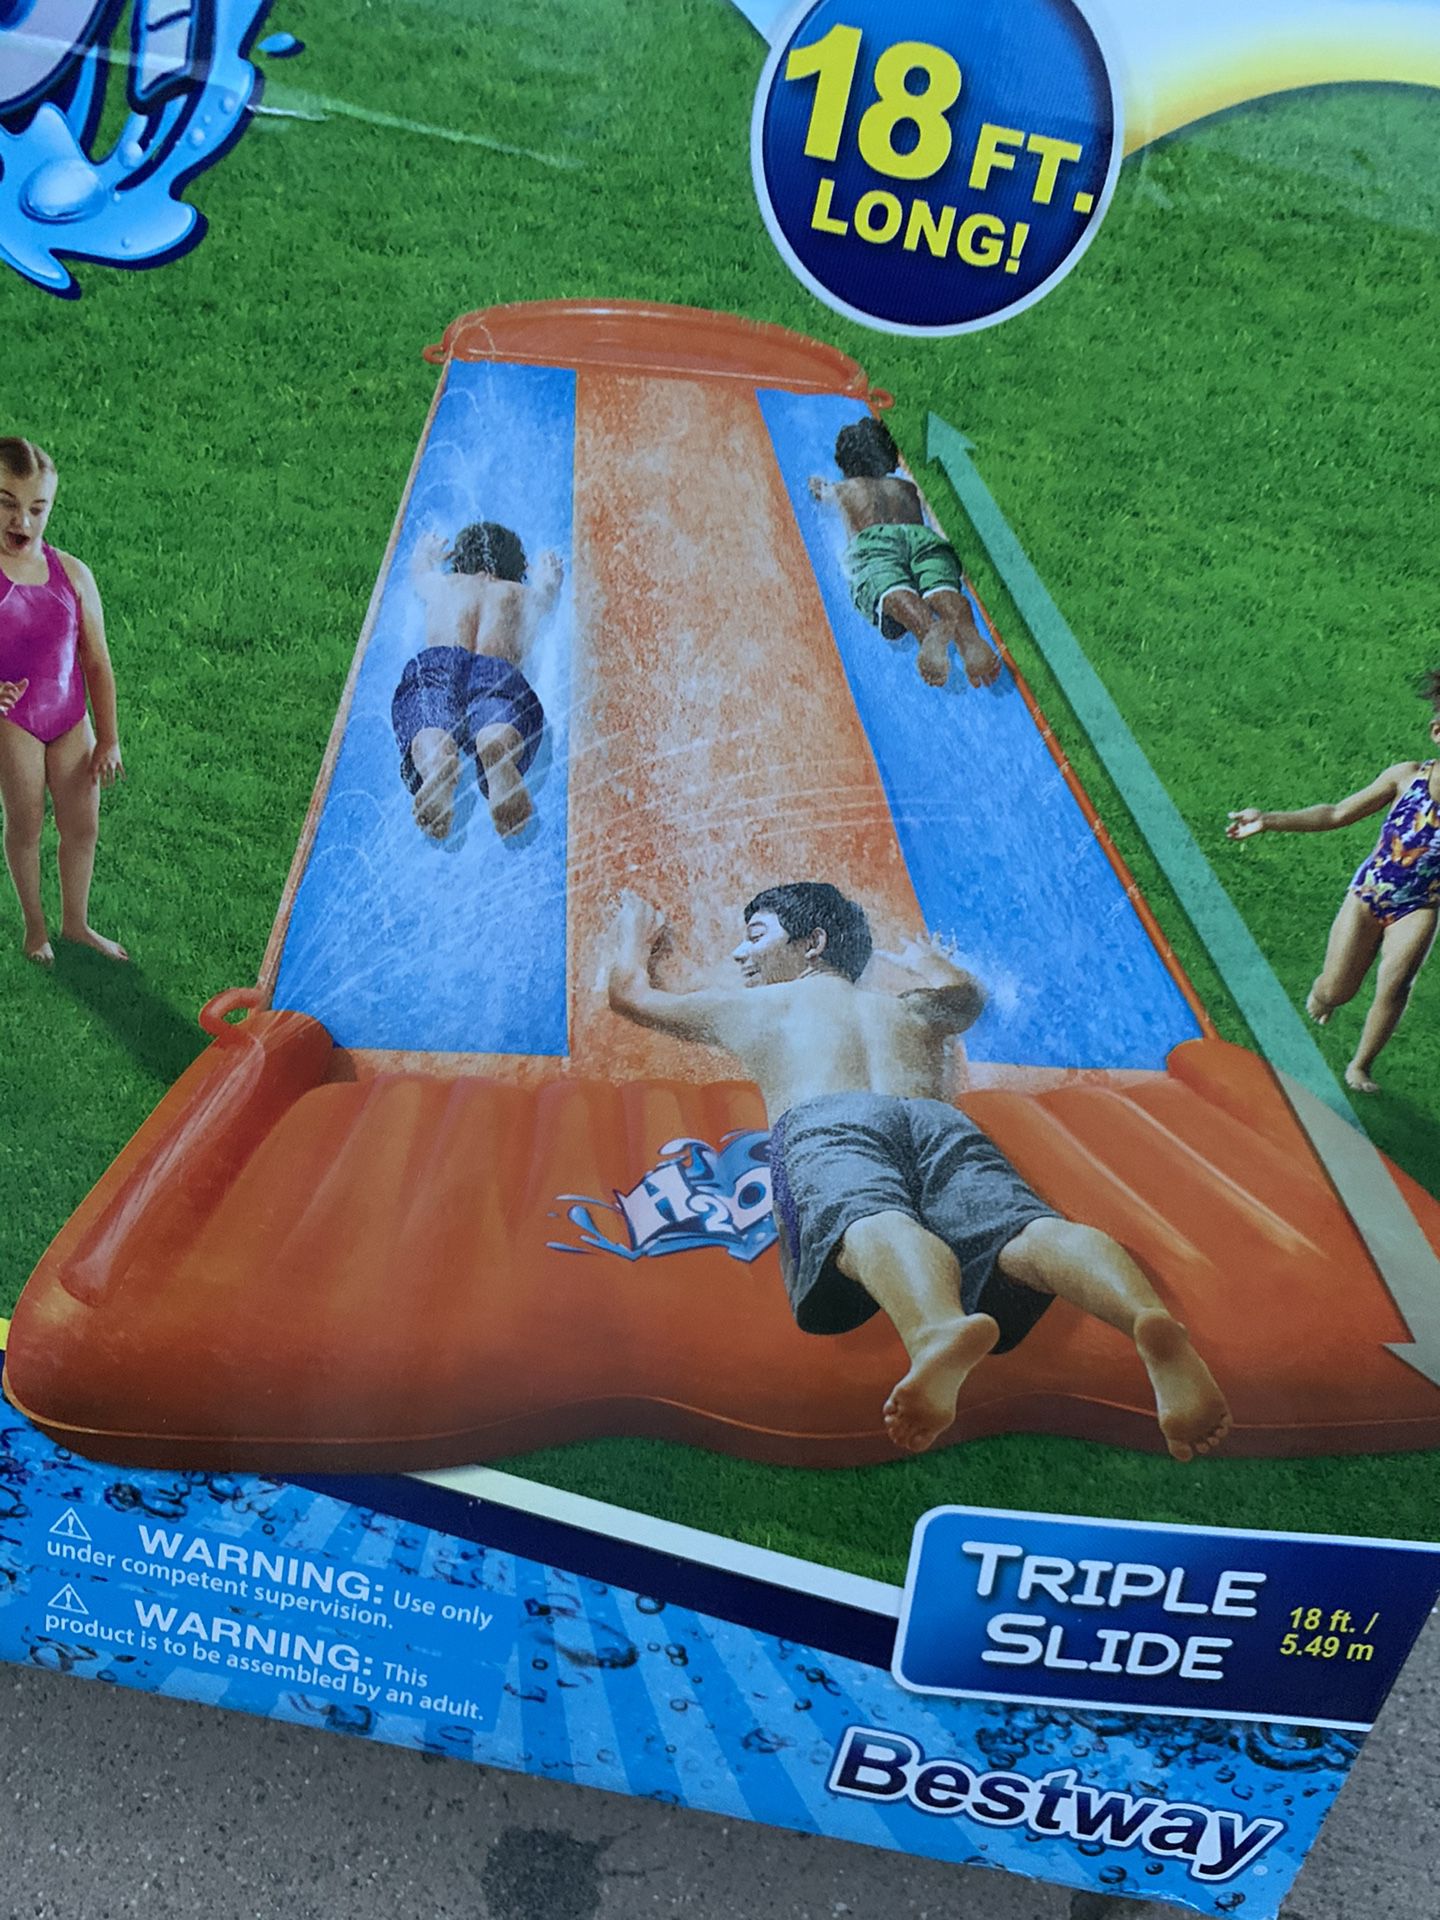 NEW TRIPLE WATER SLIDE WITH SPEED RAMP 18ft LONG 🔥 NEW IN BOX